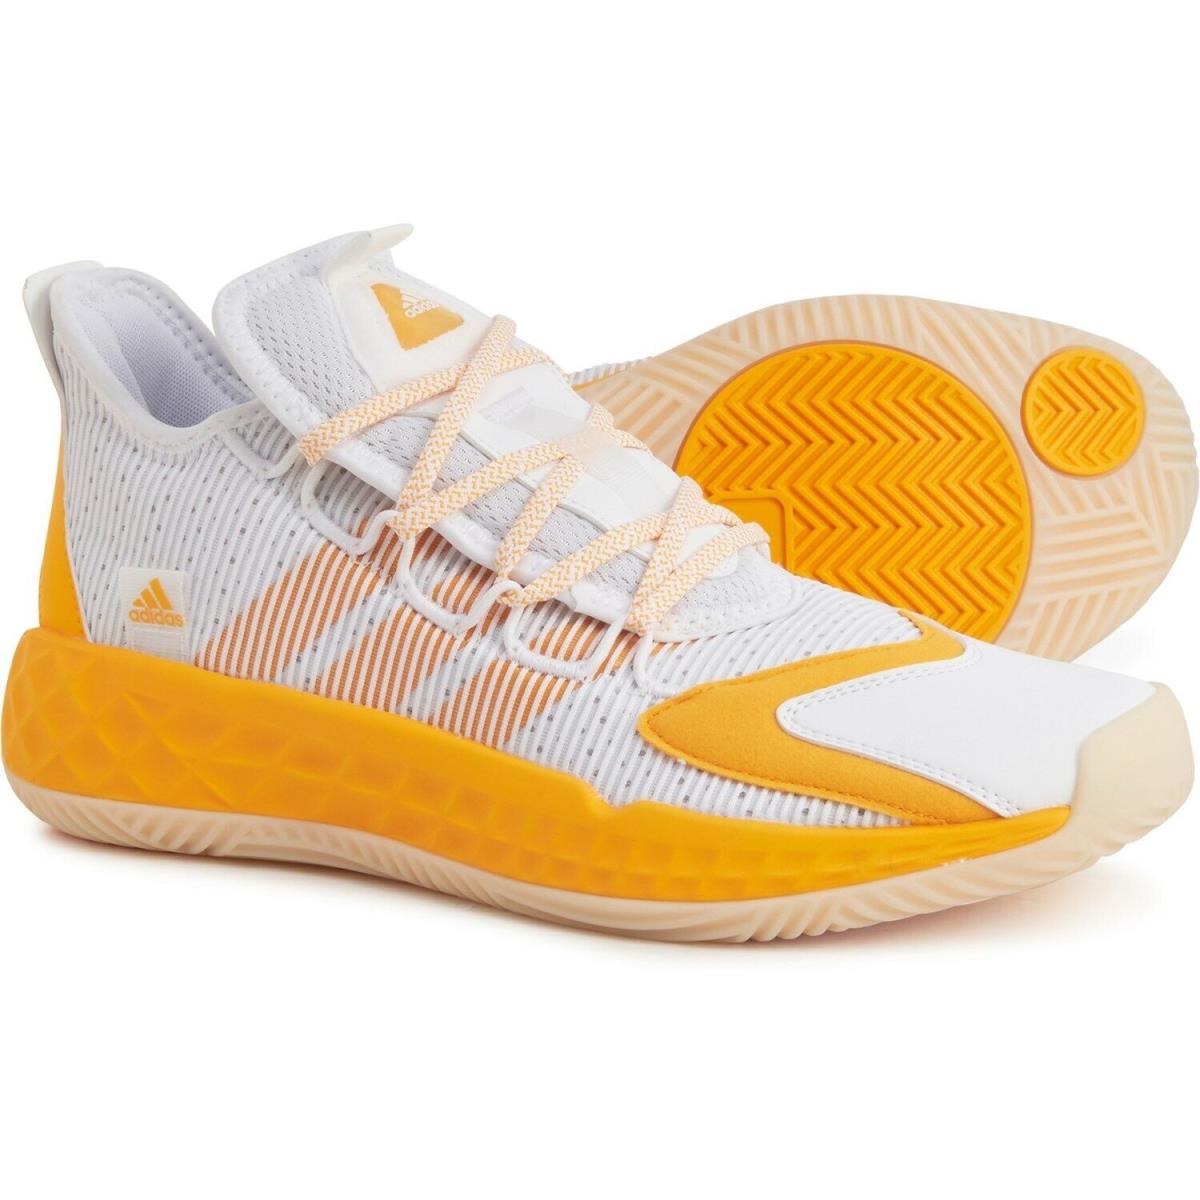 Adidas Pro Boost Low Basketball Shoes For Men Yellow Size 16